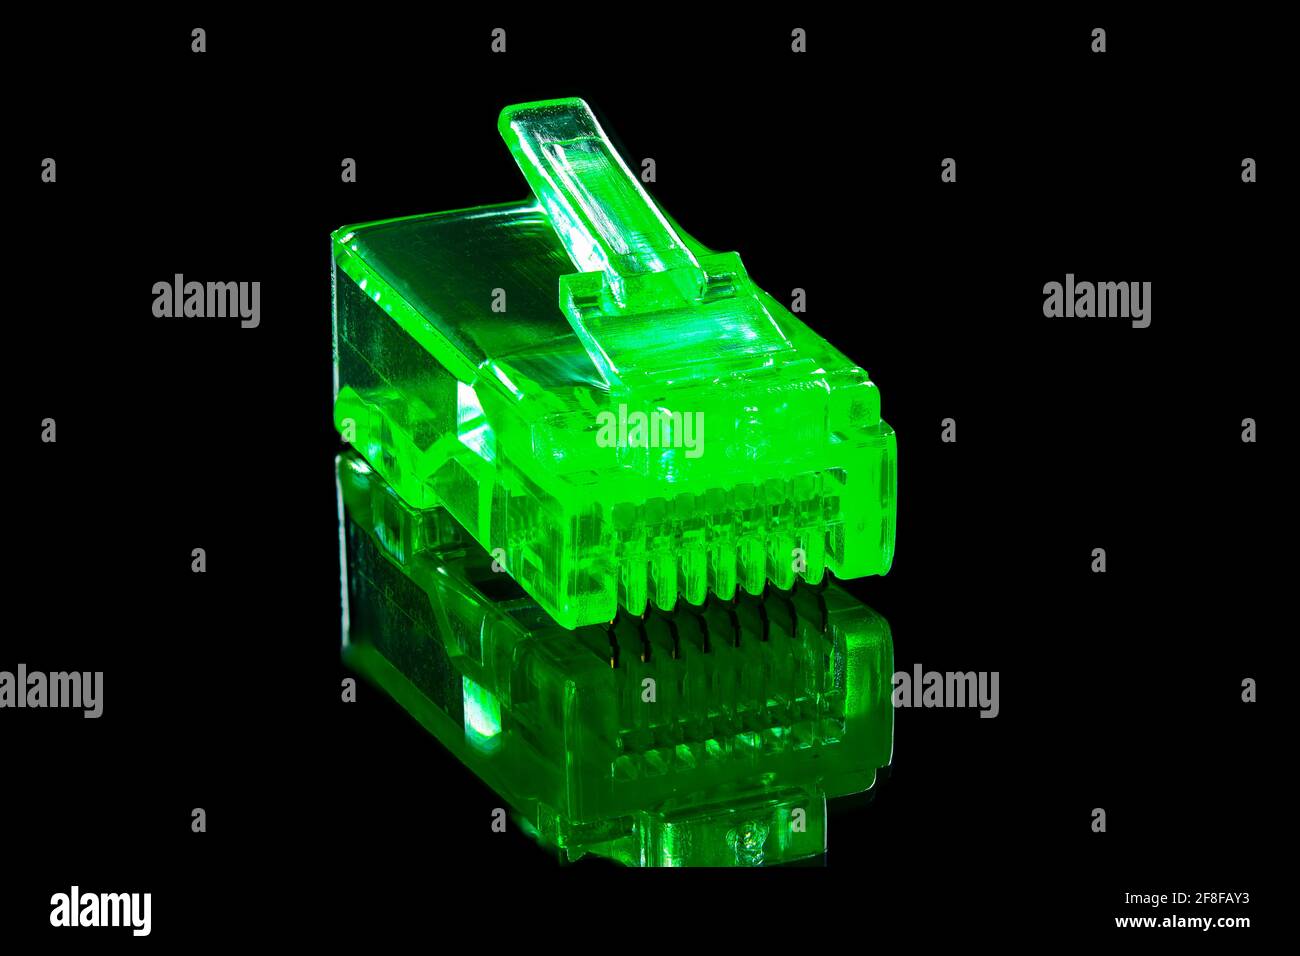 Connector rj-45. Neon green transparent connector rj45 for network and internet. Close up macro on black background with reflection, full depth of fie Stock Photo